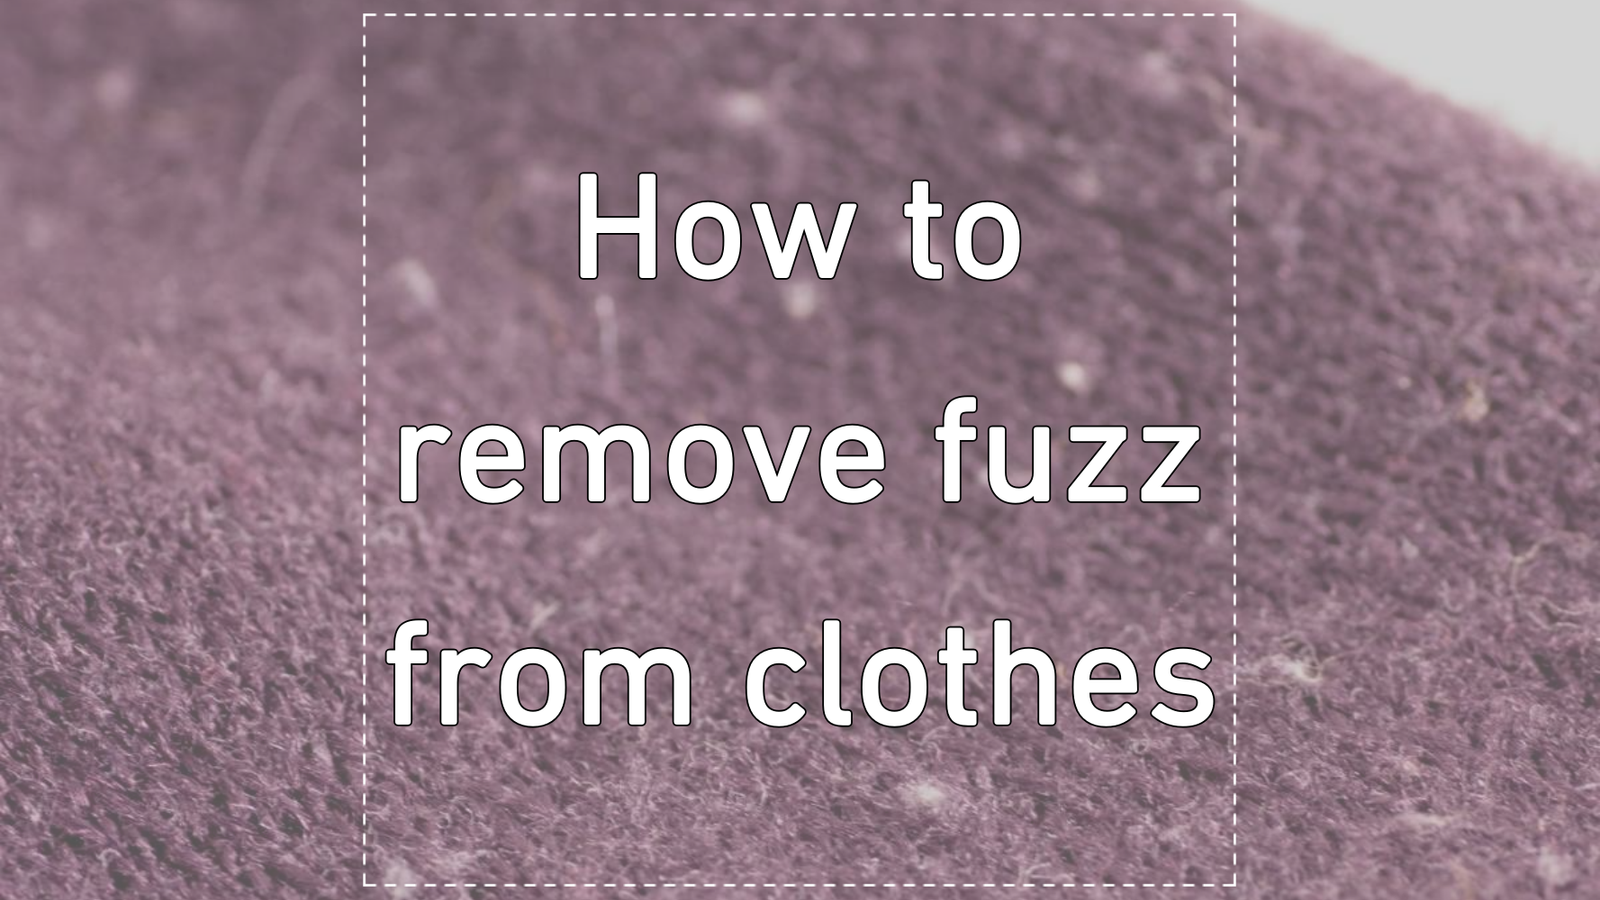 How to remove fuzz from clothes